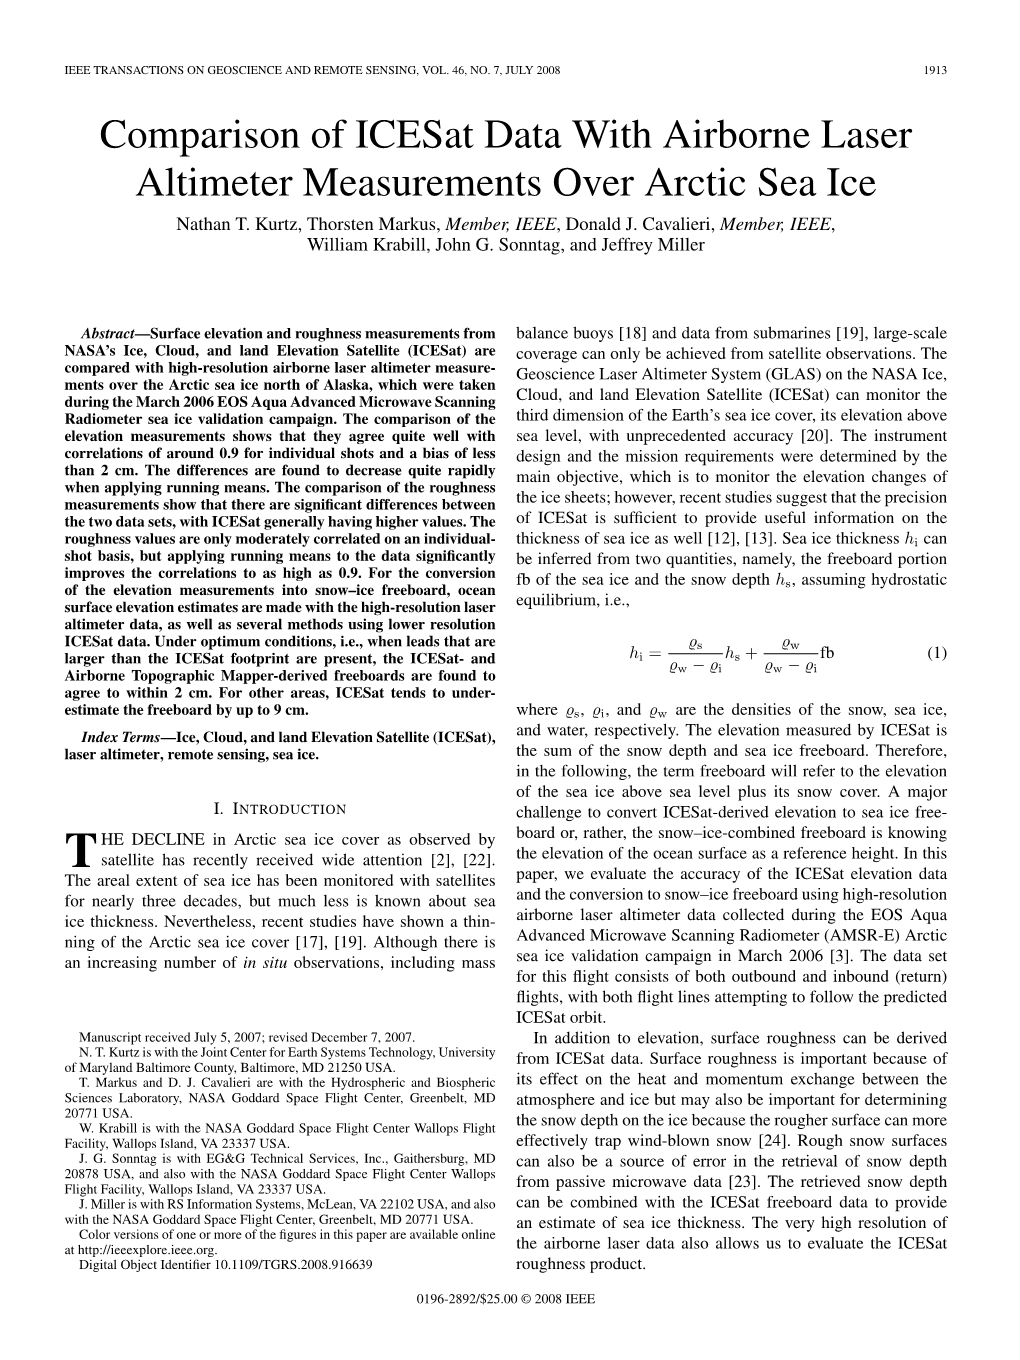 Comparison of Icesat Data with Airborne Laser Altimeter Measurements Over Arctic Sea Ice Nathan T